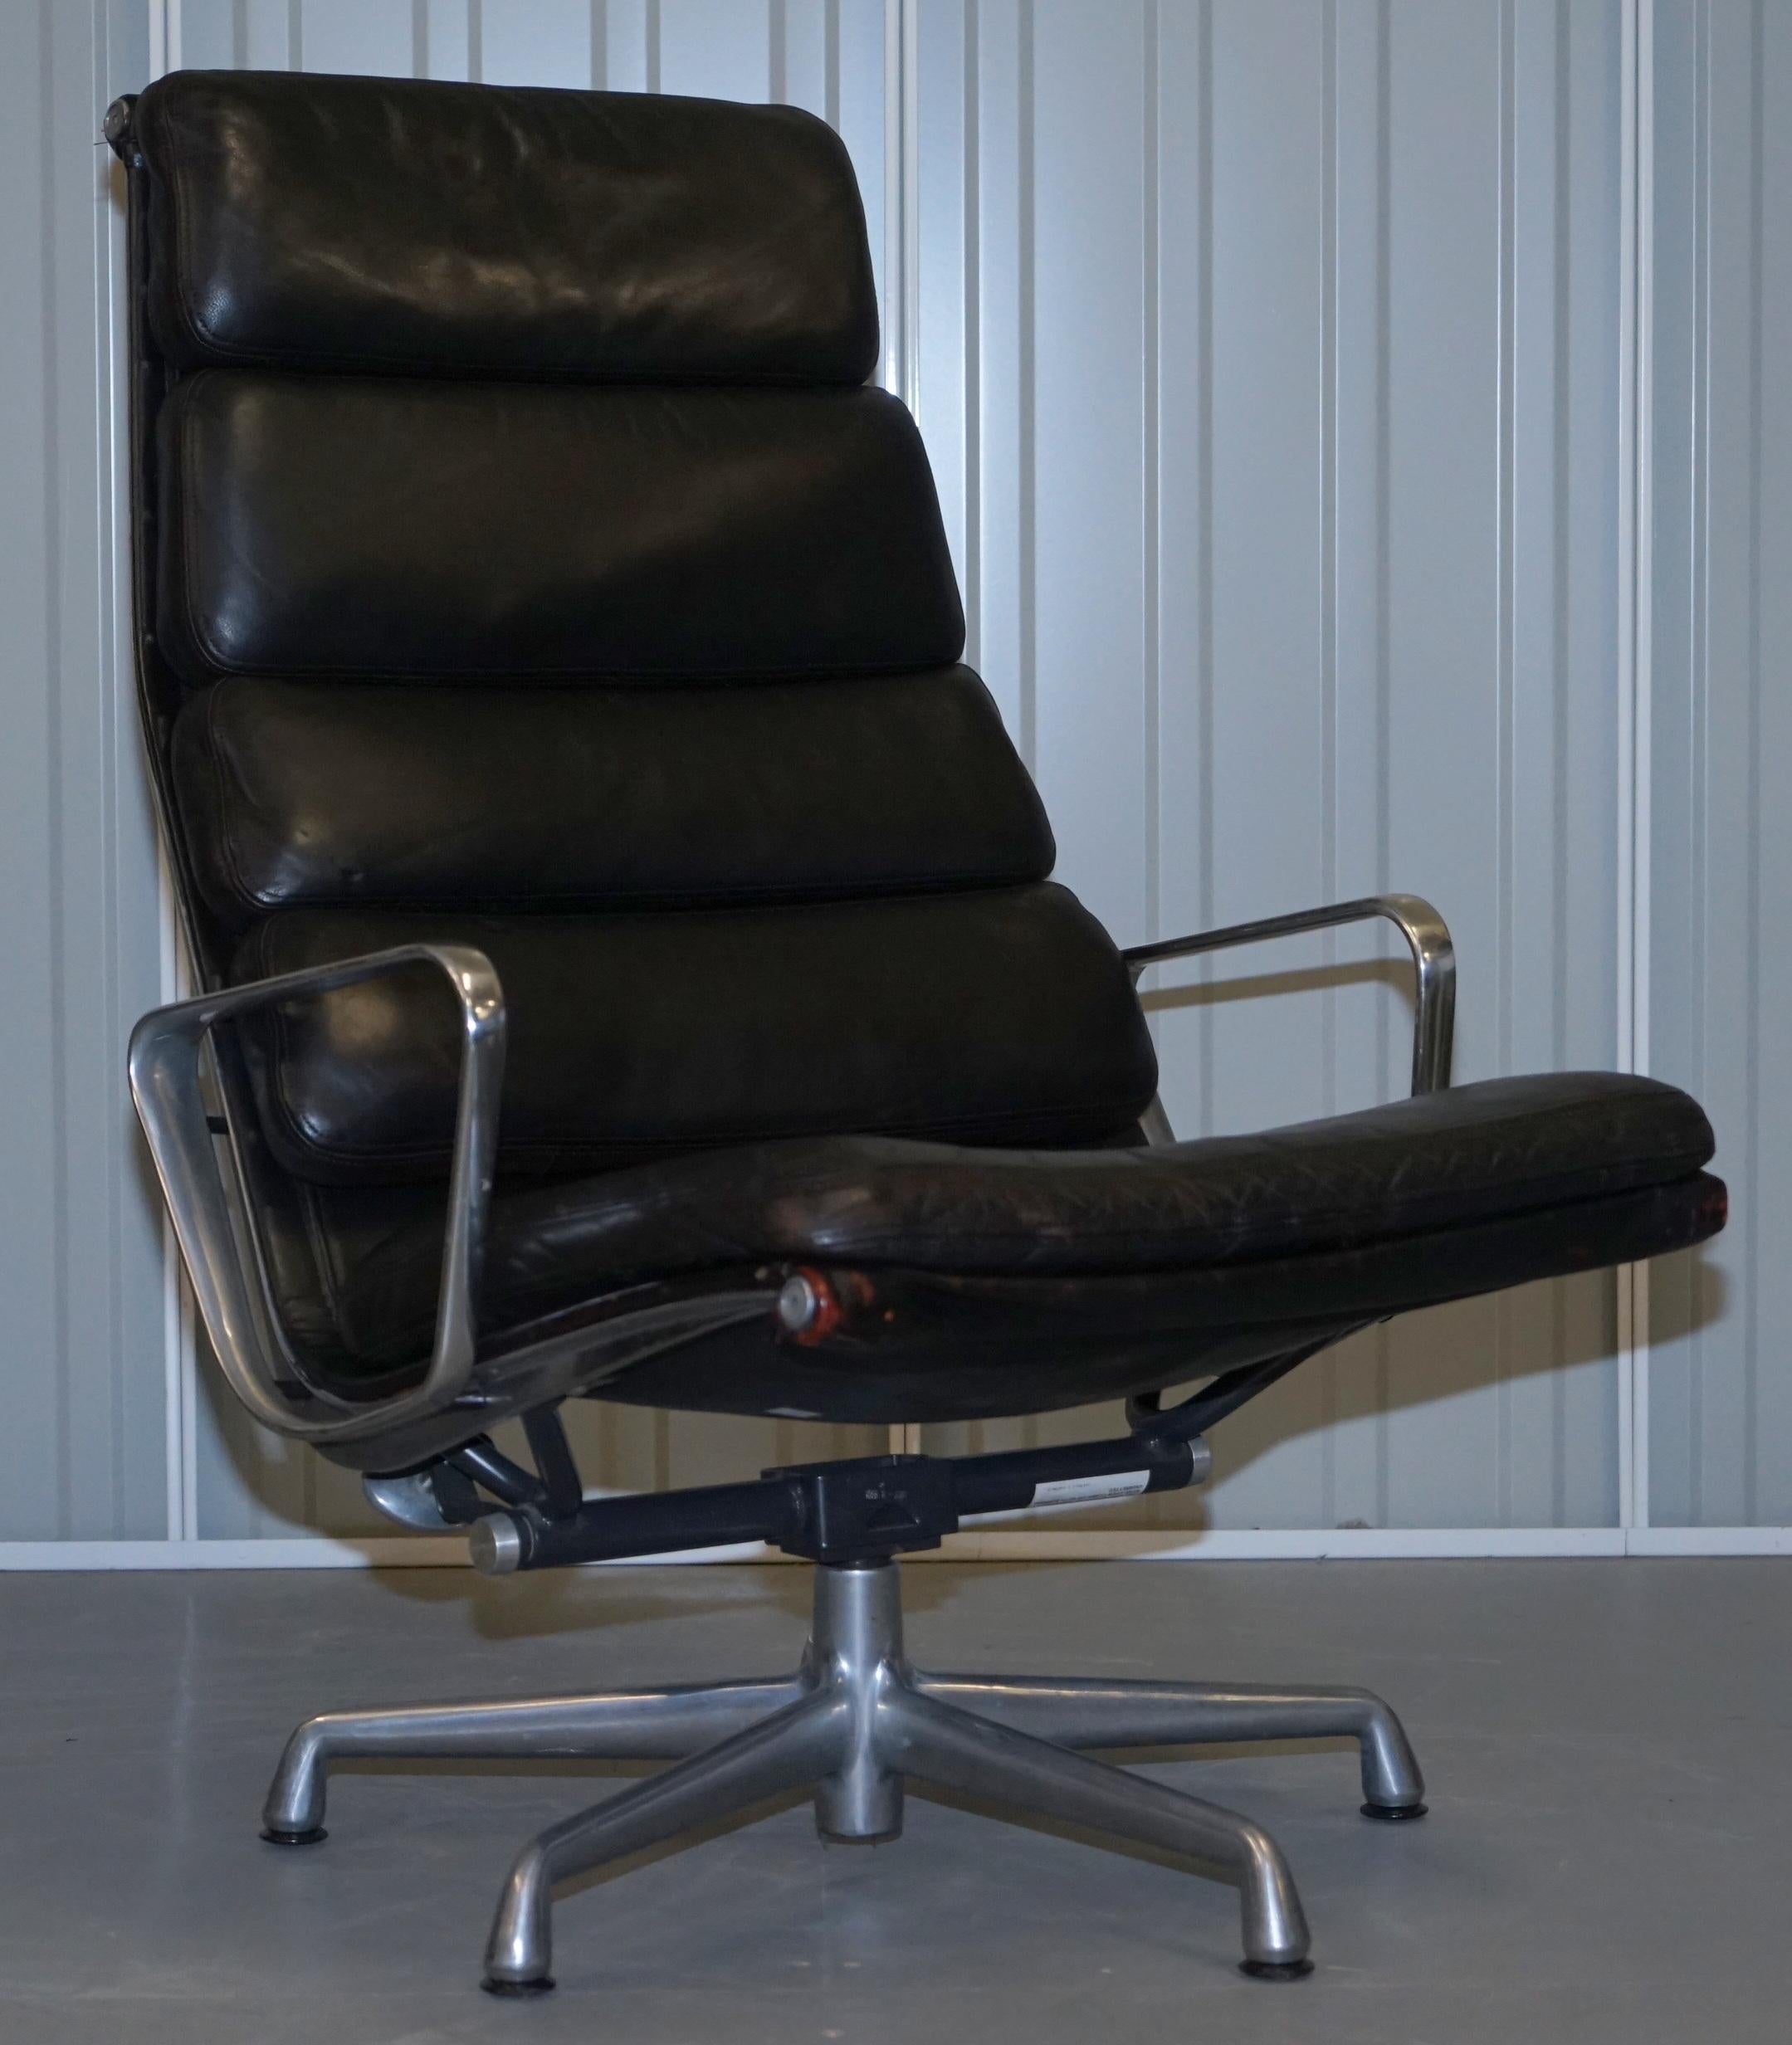 We are delighted to offer for sale this lovely suite of vintage 1996/1997 Charles and Ray Eames for Herman Miller Ea222 reclining lounge armchairs with matching black leather ottomans. Current RRP £10,544

A highly collectable, exceptionally